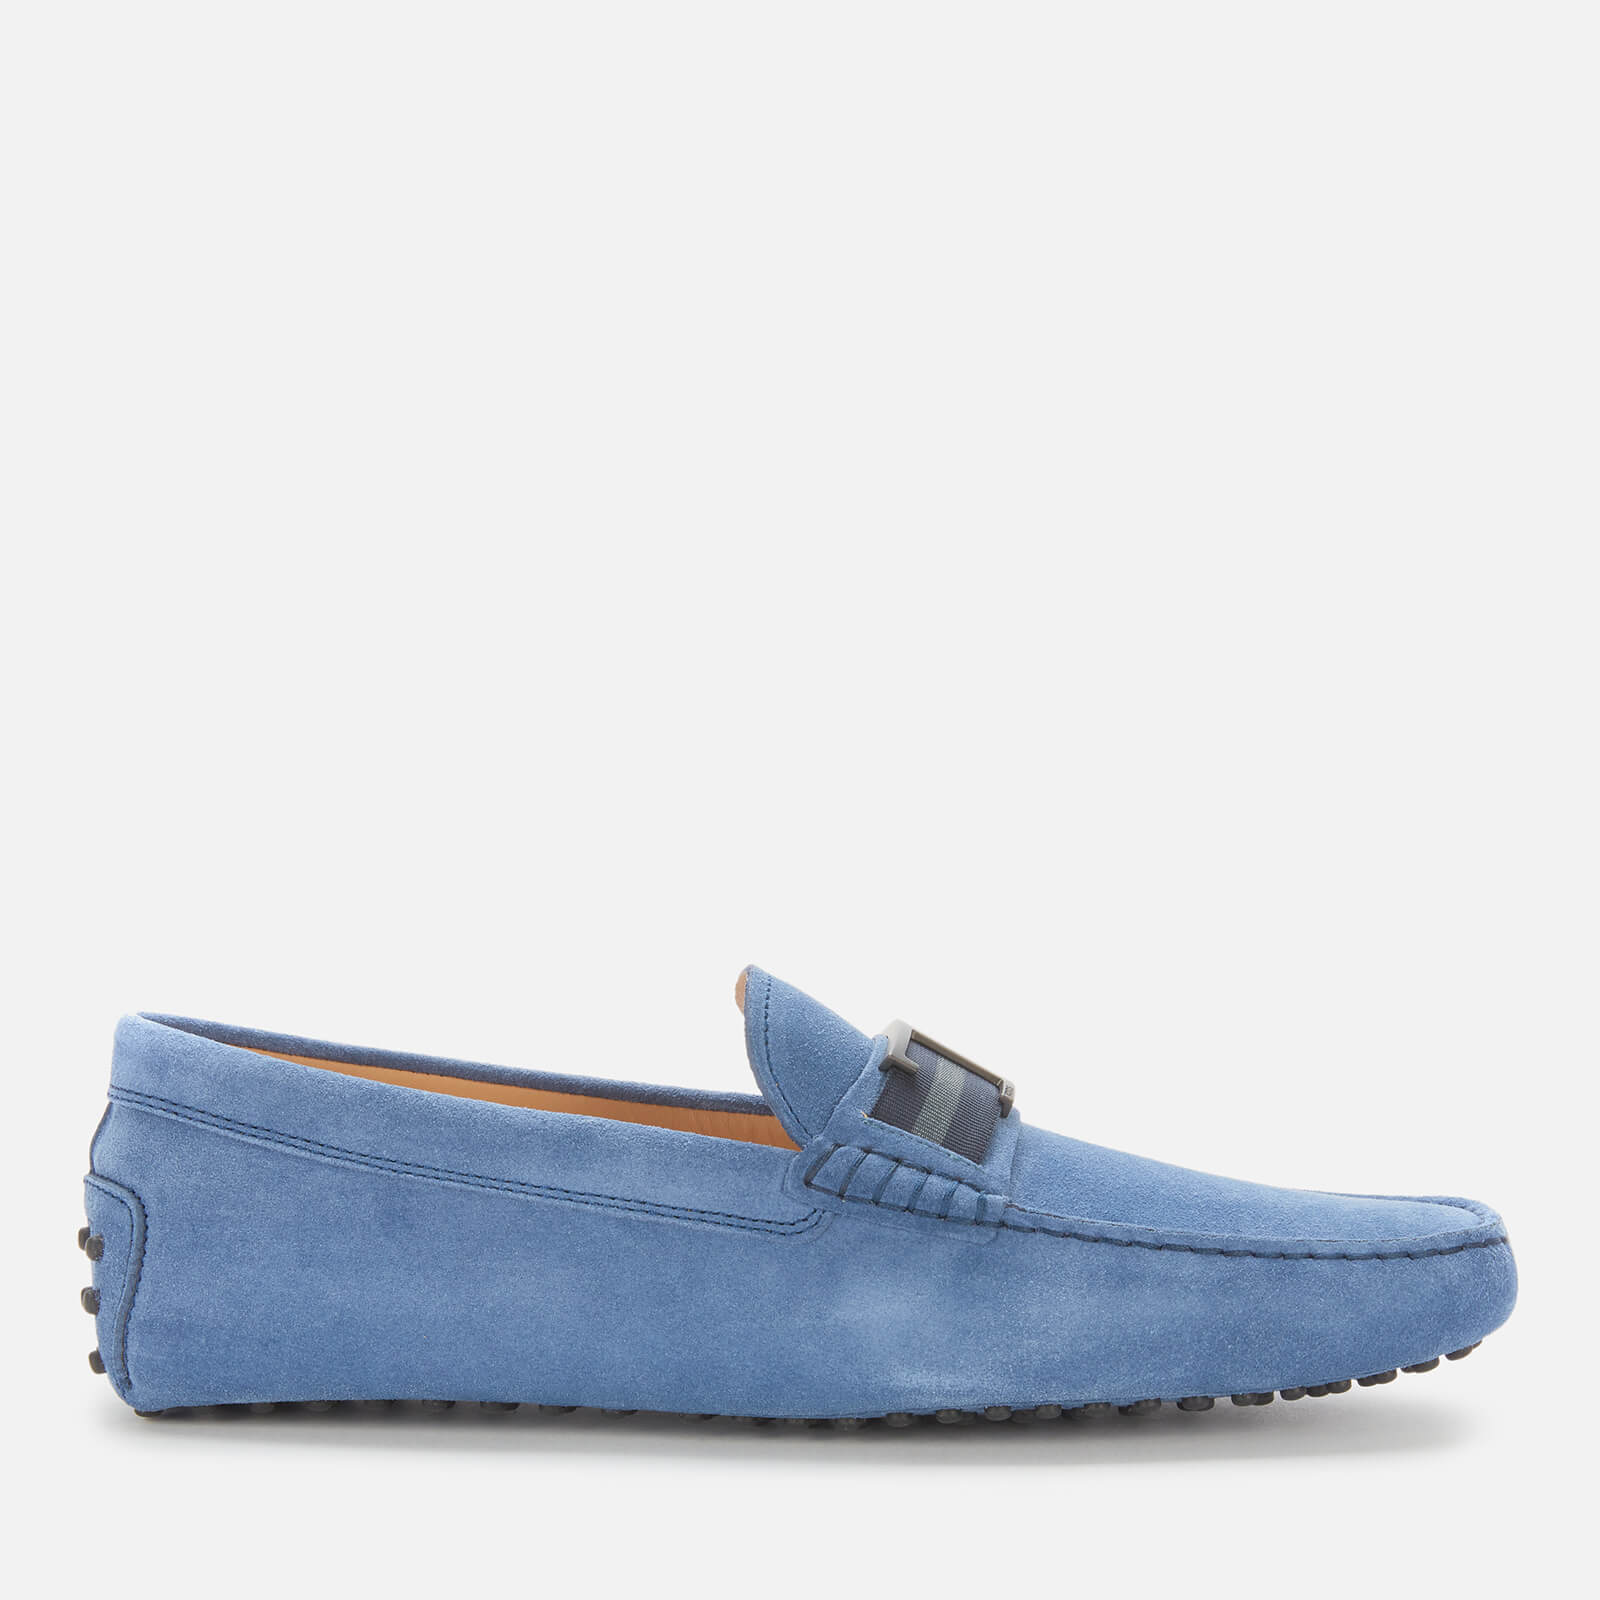 Tod's Men's Gommino 122 Suede Driving Shoes - Blue - UK 7